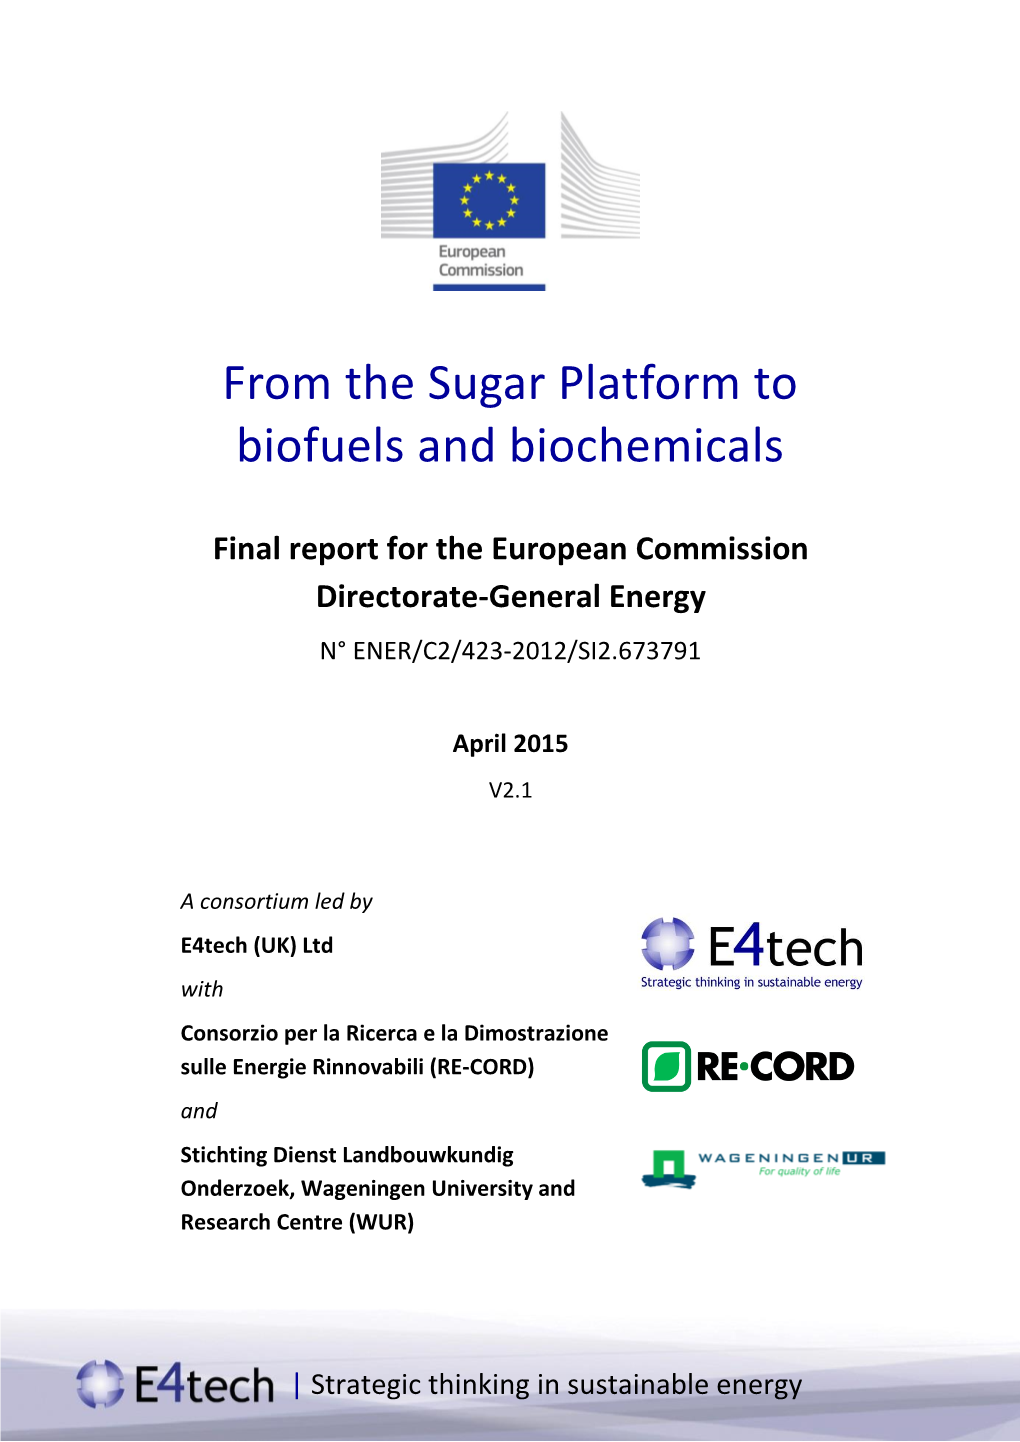 From the Sugar Platform to Biofuels and Biochemicals